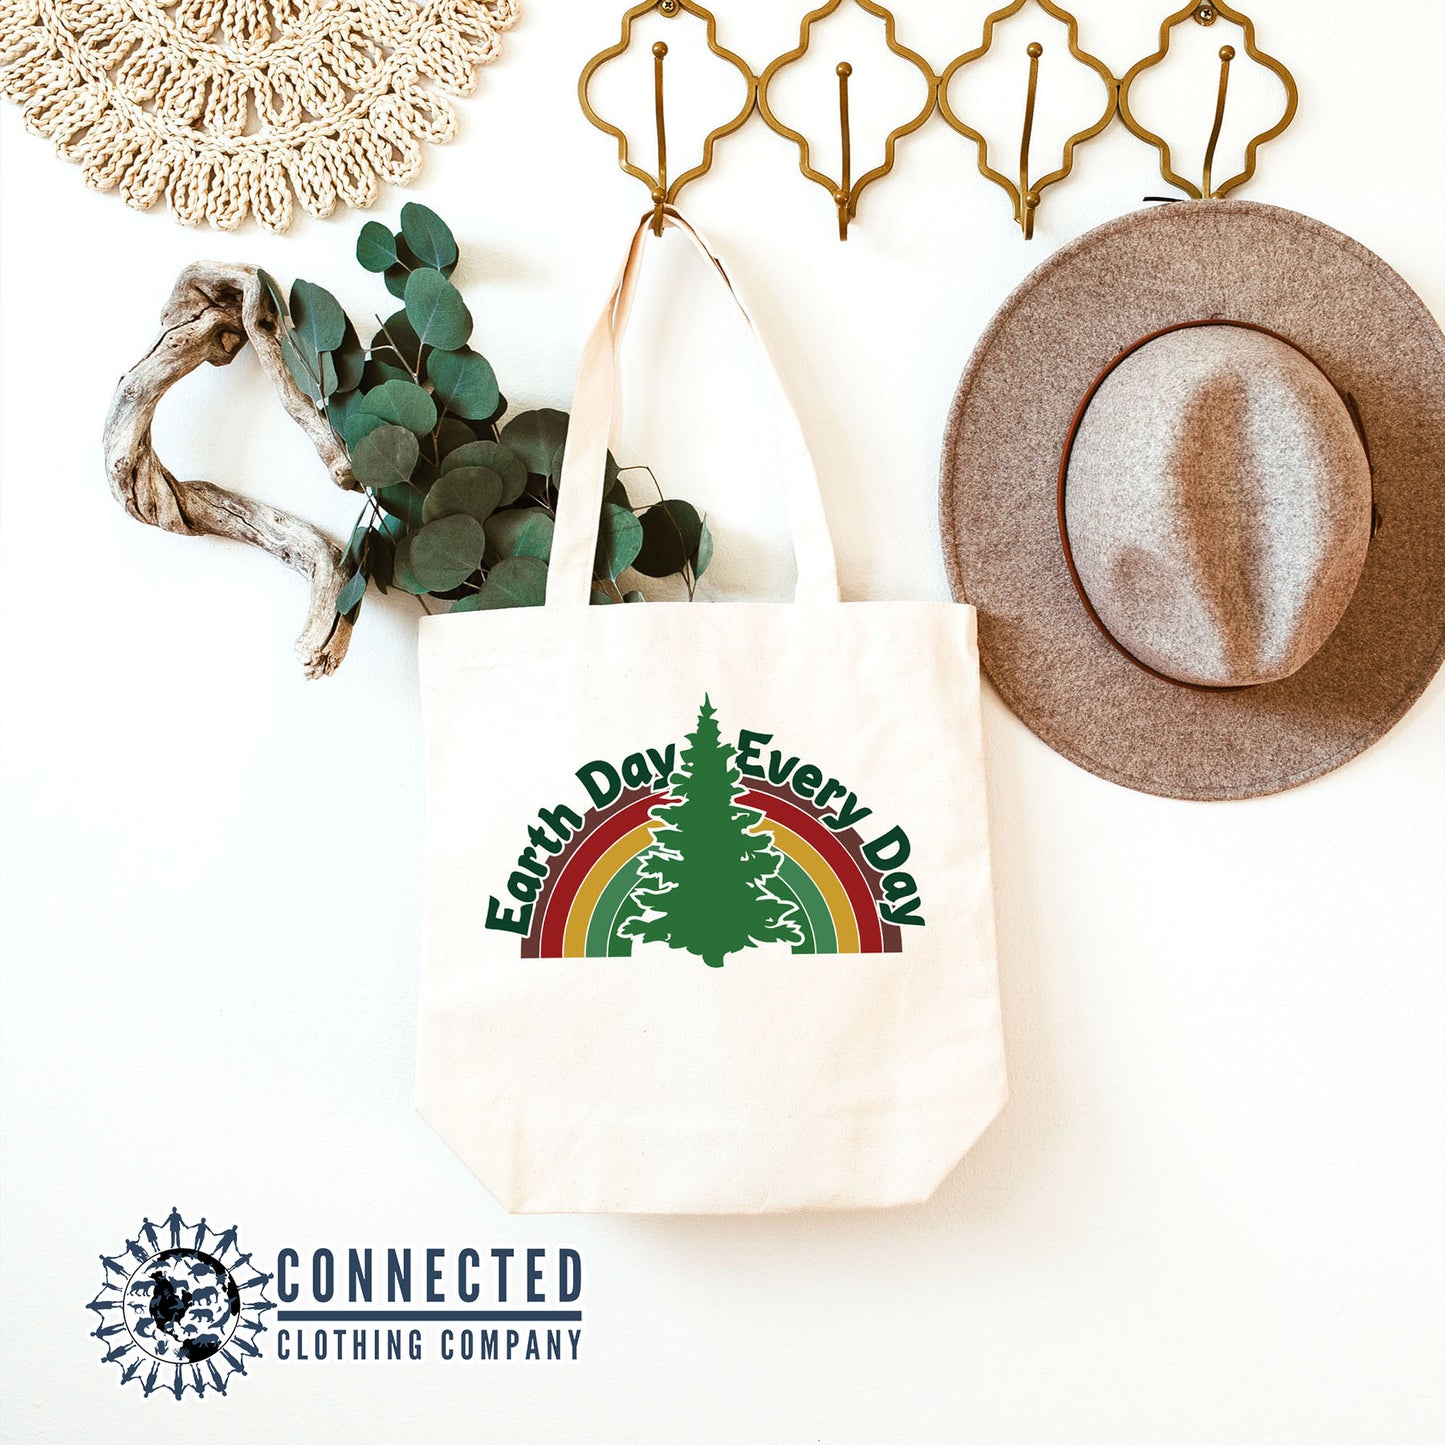 Retro Earth Day Every Day Tote - Connected Clothing Company - 10% of proceeds donated to ocean conservation